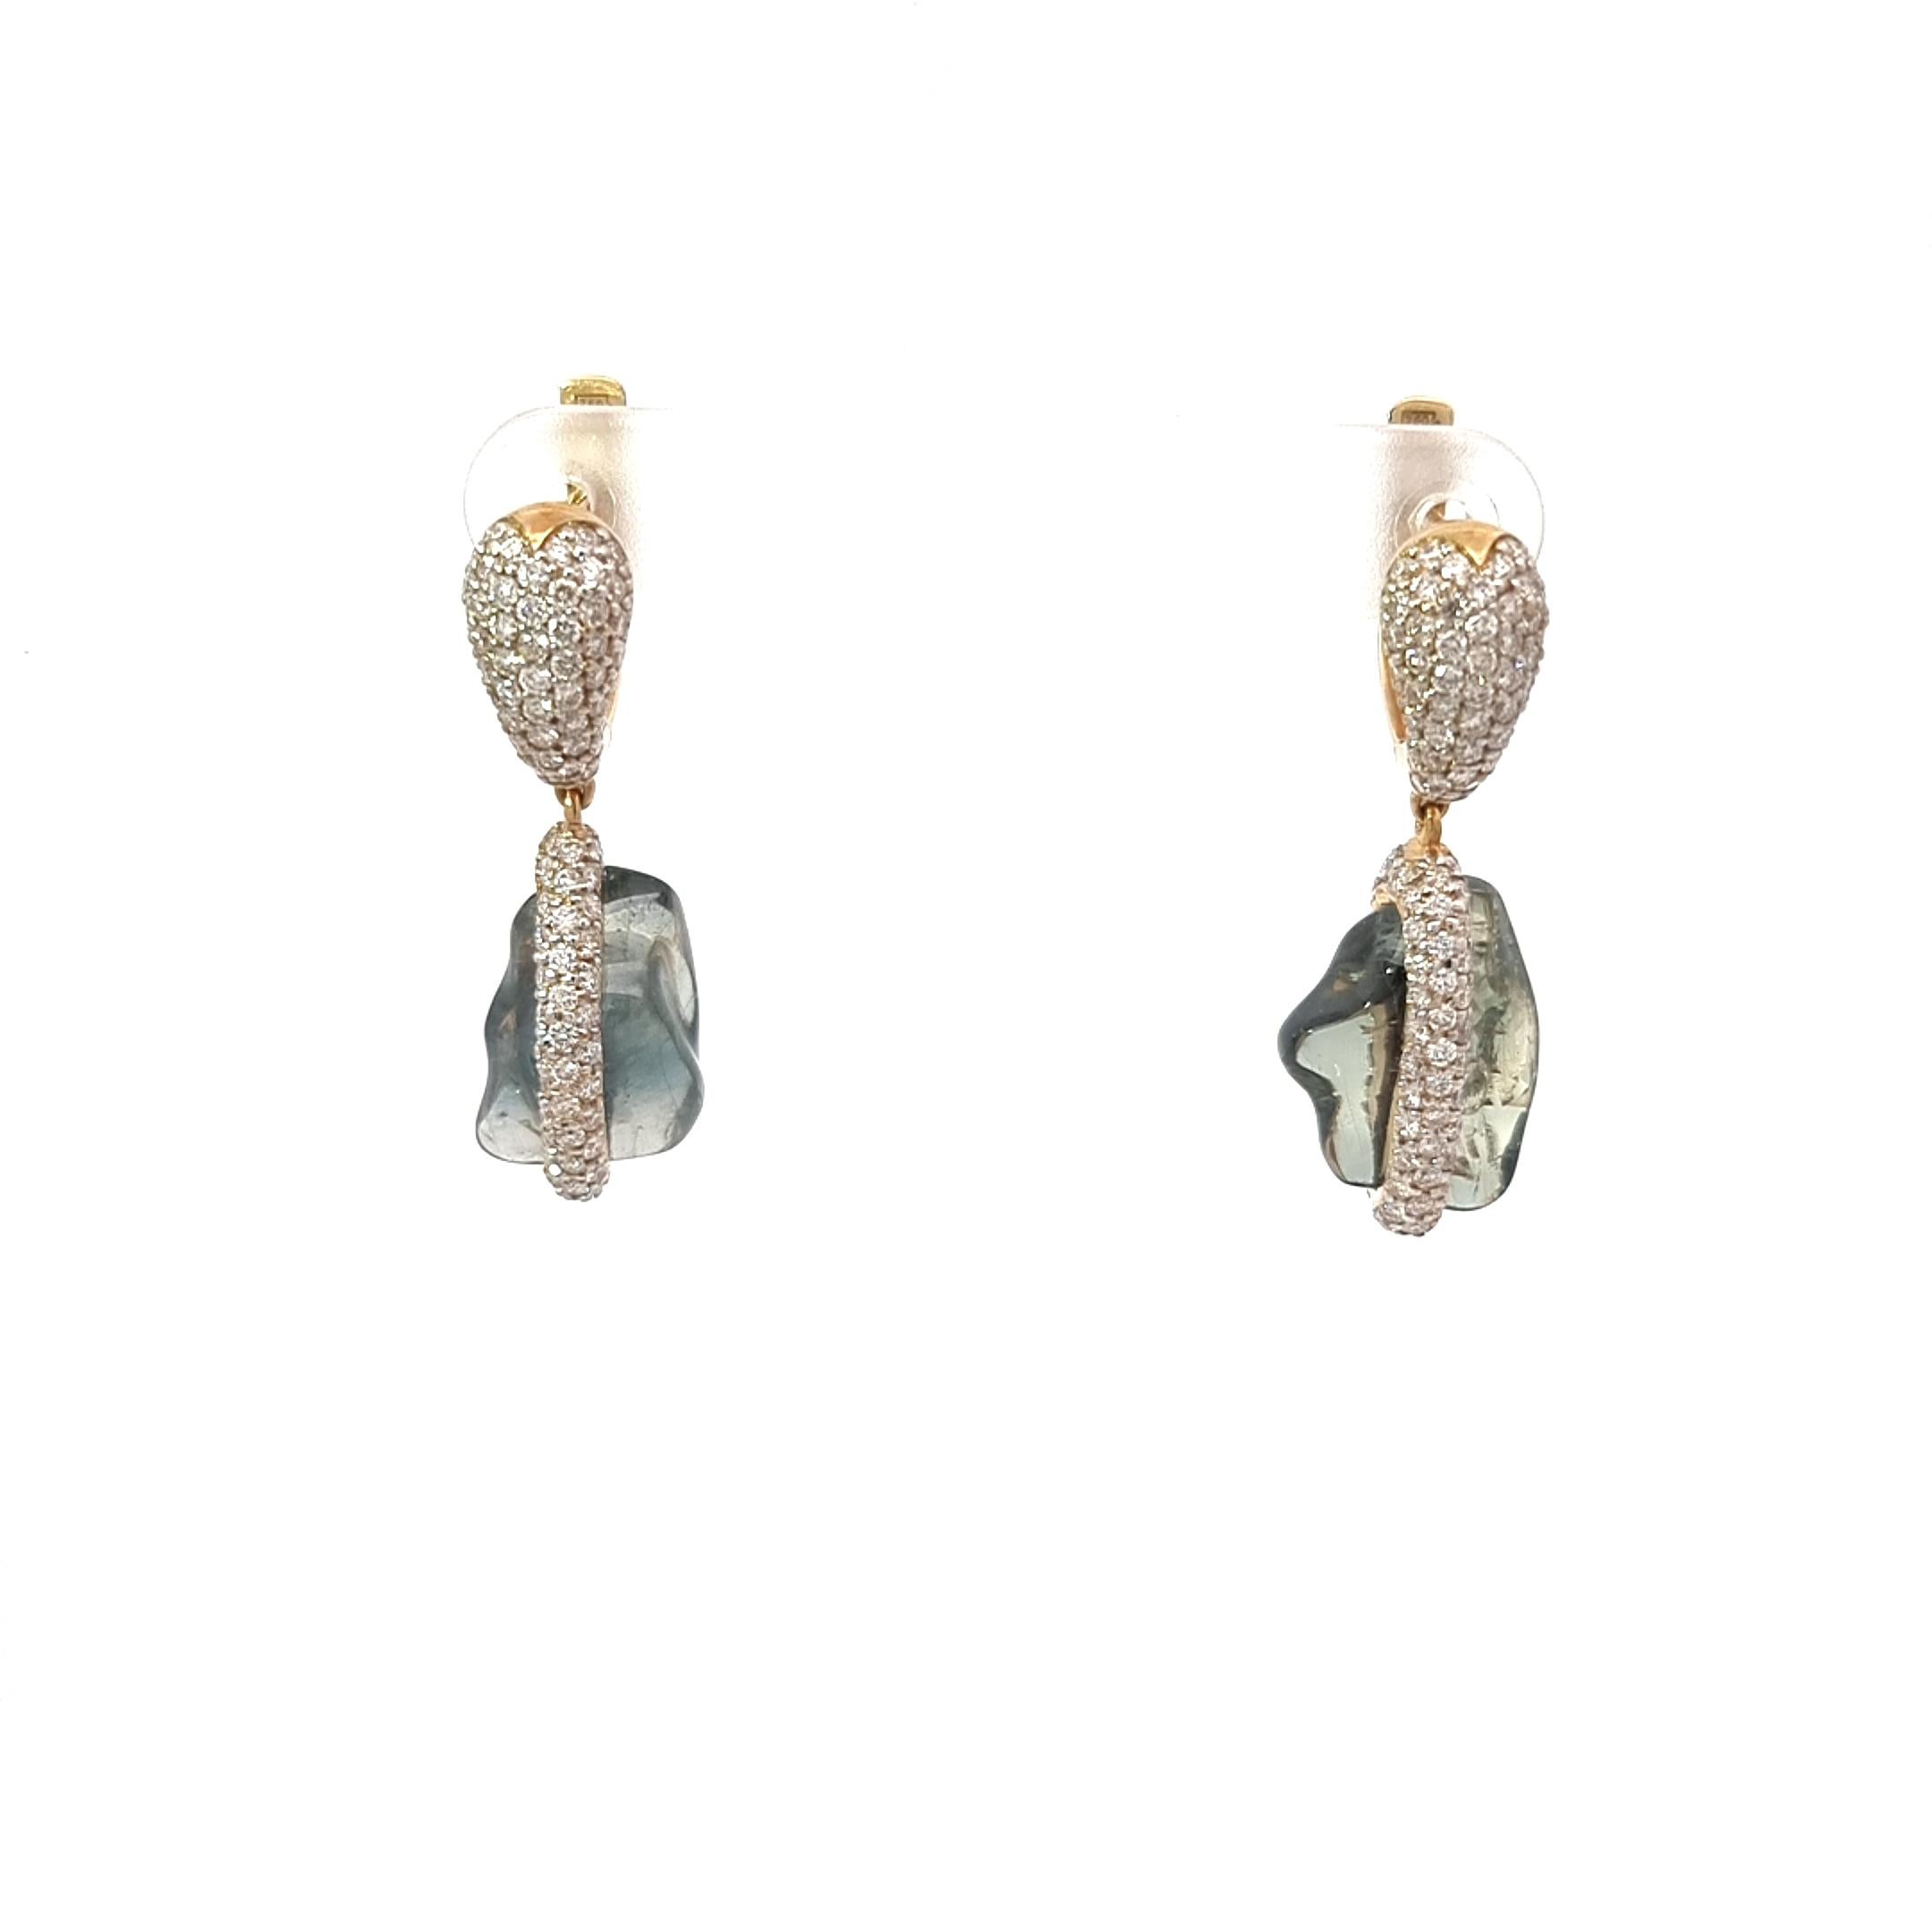 Organic Collection by VOTIVE.

Immerse yourself in the captivating allure of VOTIVE's Organic Collection through these exceptional earrings. Embracing the raw elegance inherent in nature, the uncut yet polished blue sapphires at the heart of each